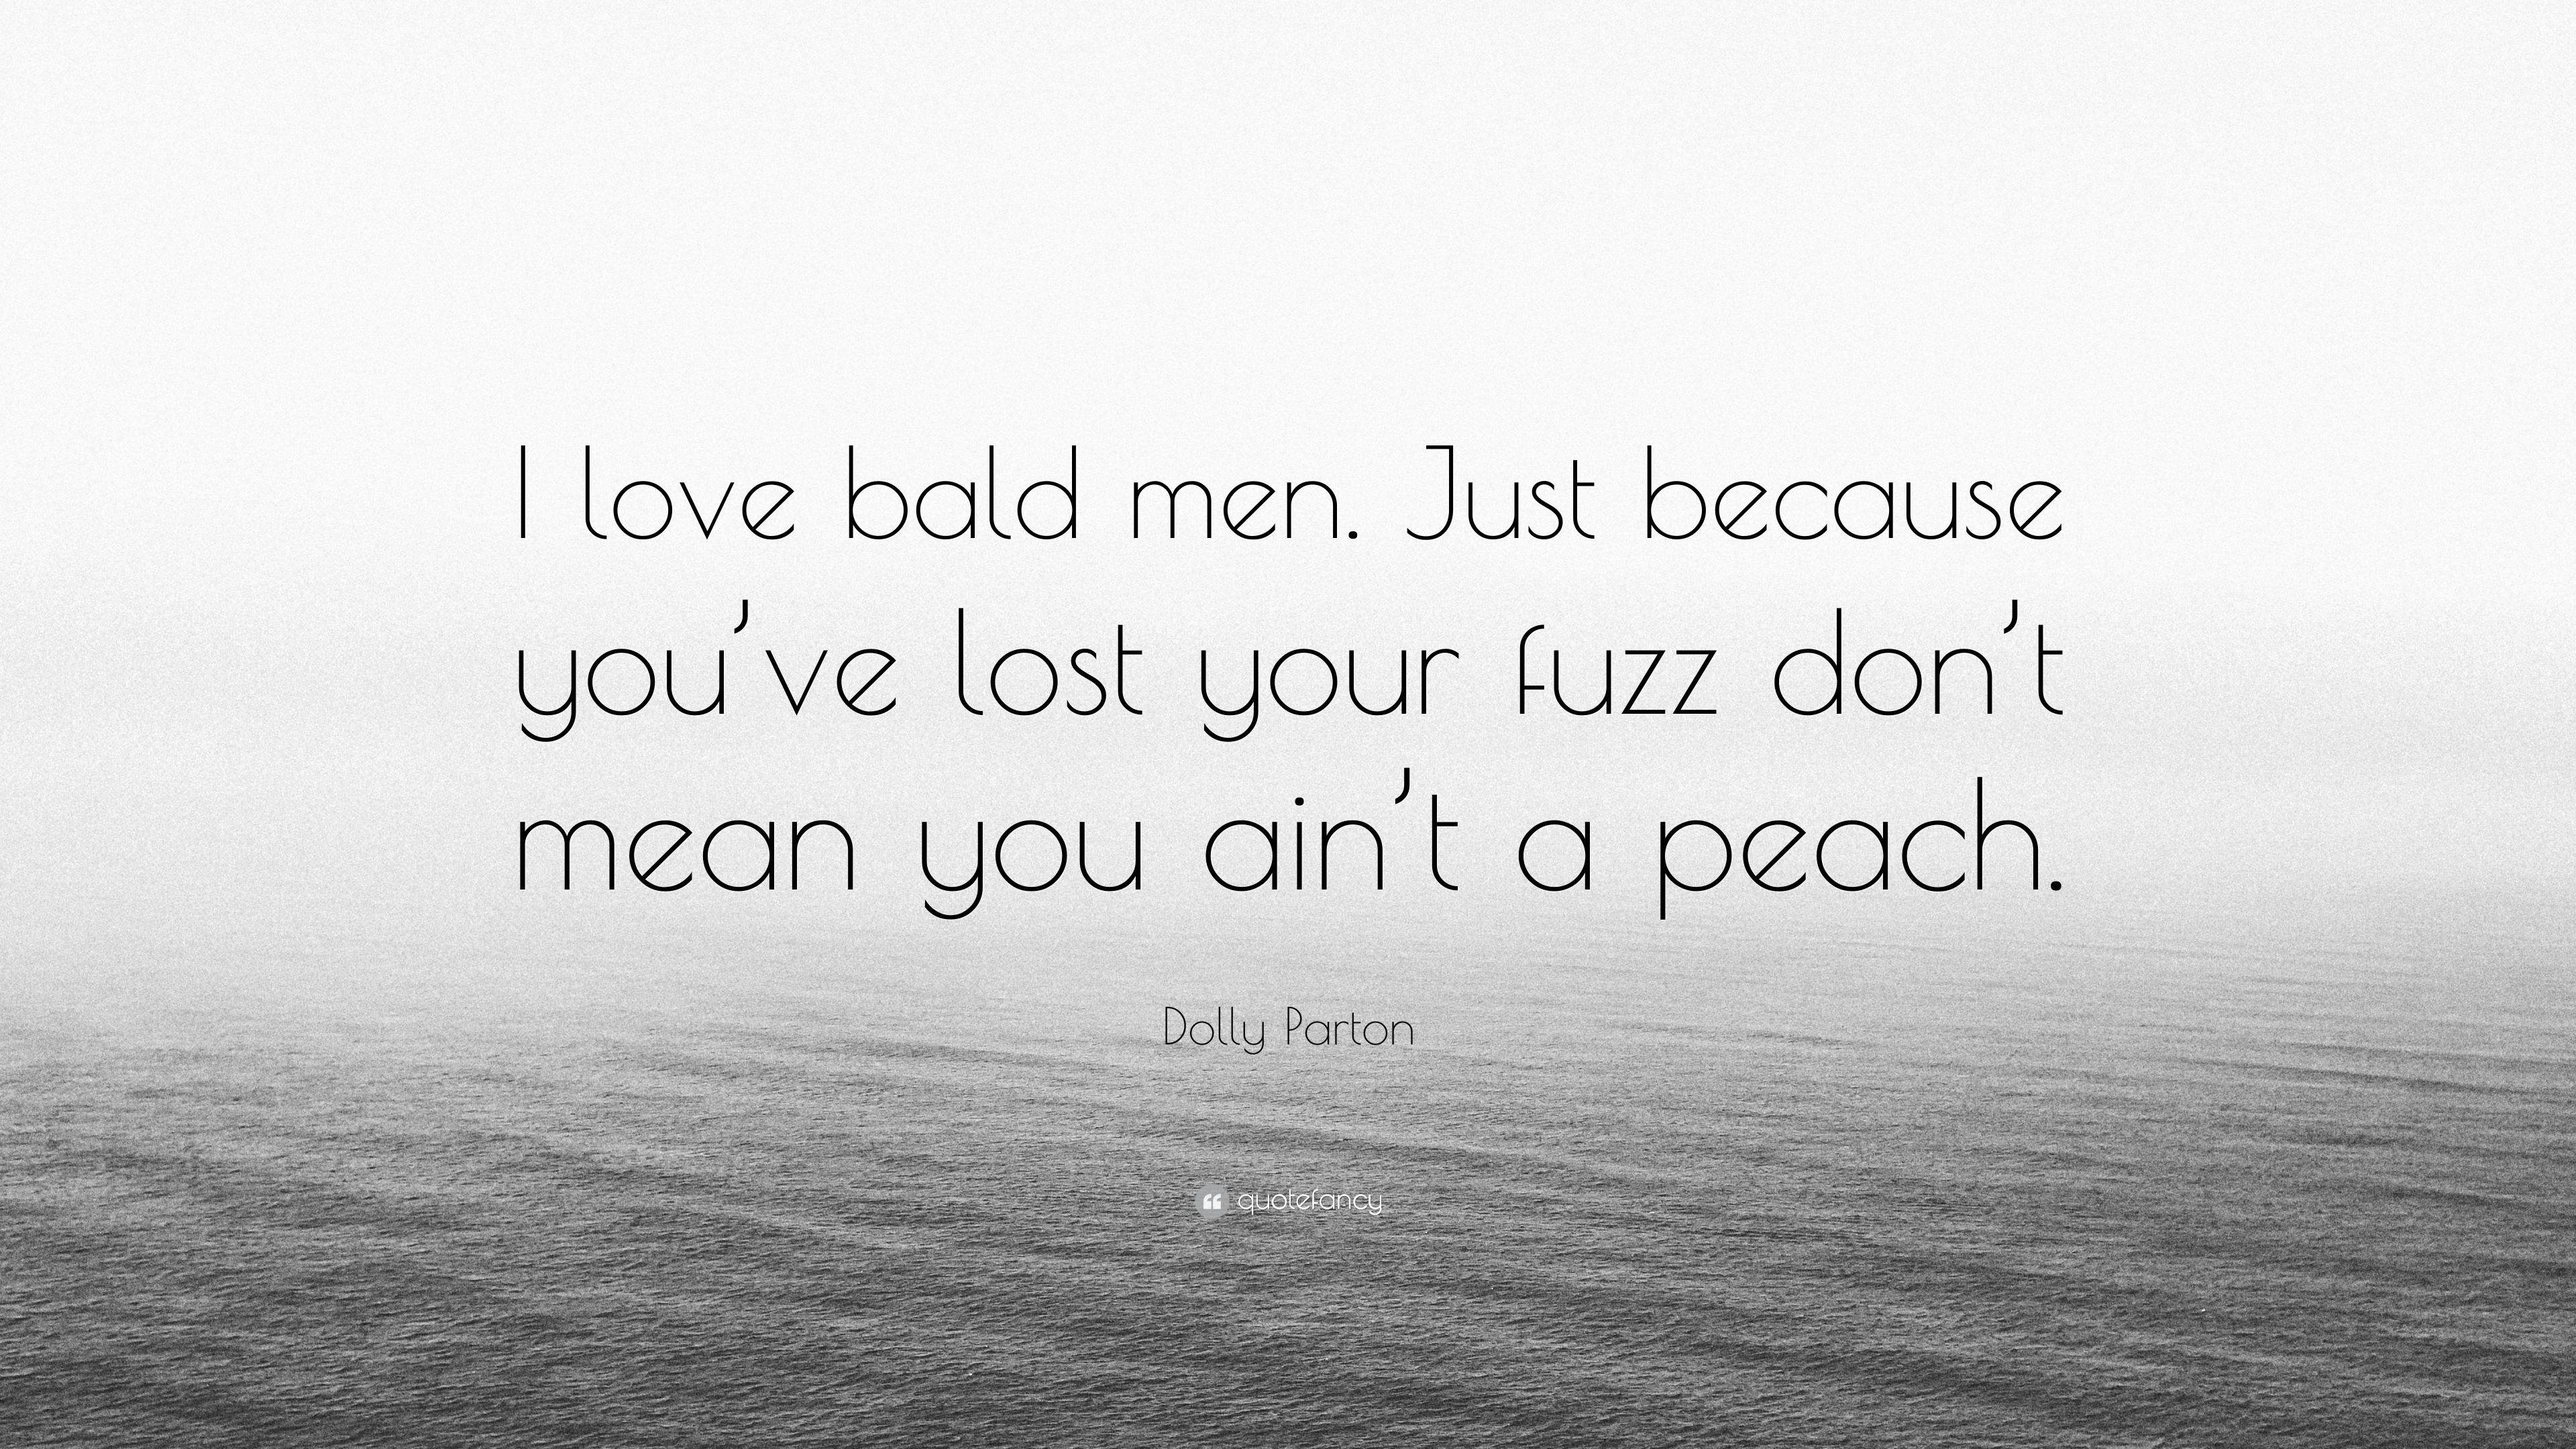 Dolly Parton Quote “I love bald men Just because you ve lost